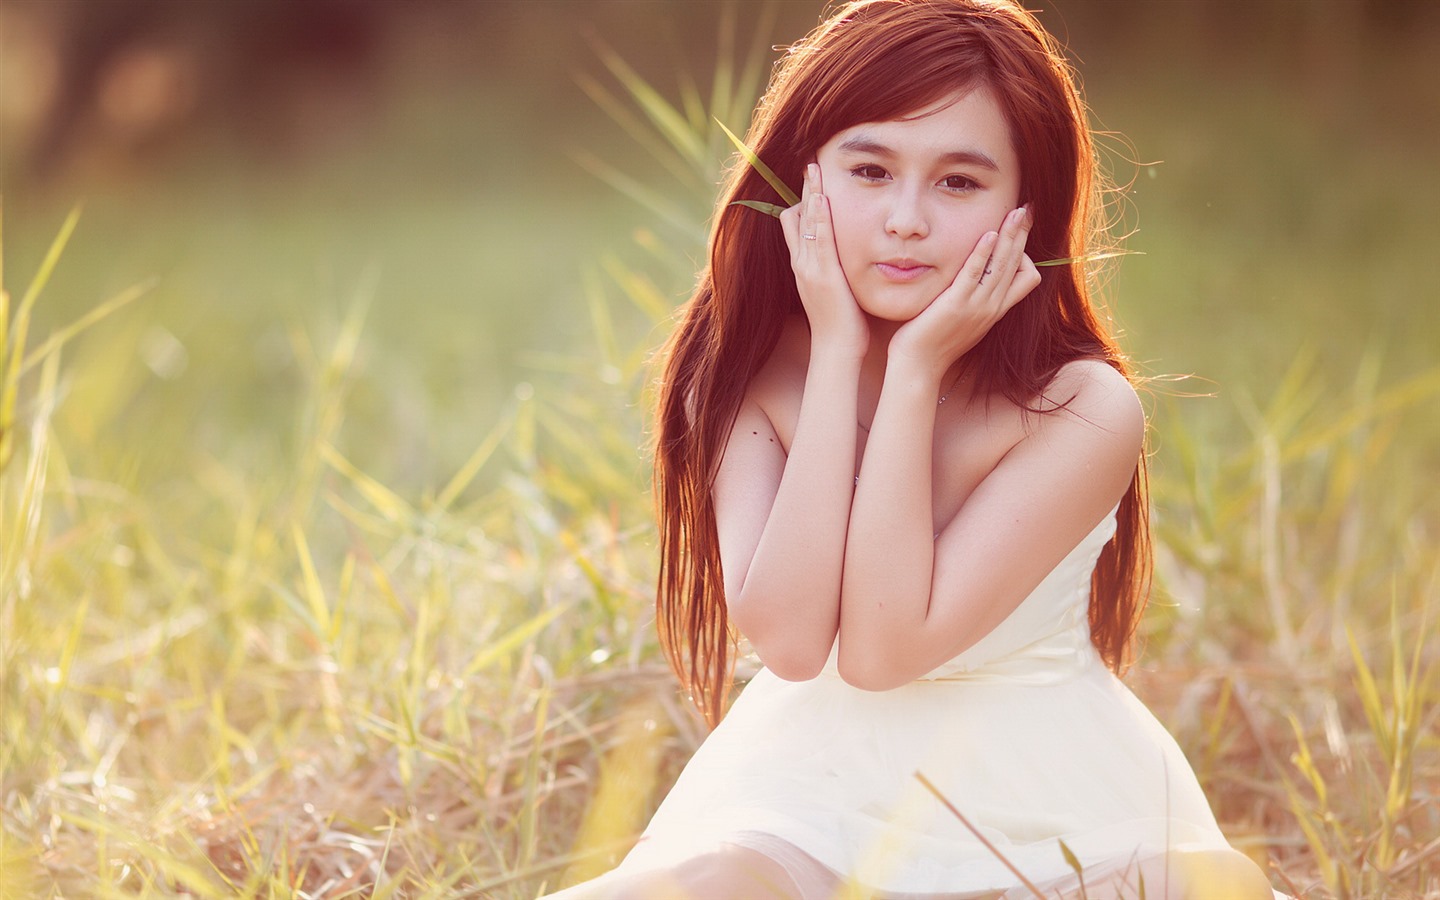 Pure and lovely young Asian girl HD wallpapers collection (3) #11 - 1440x900